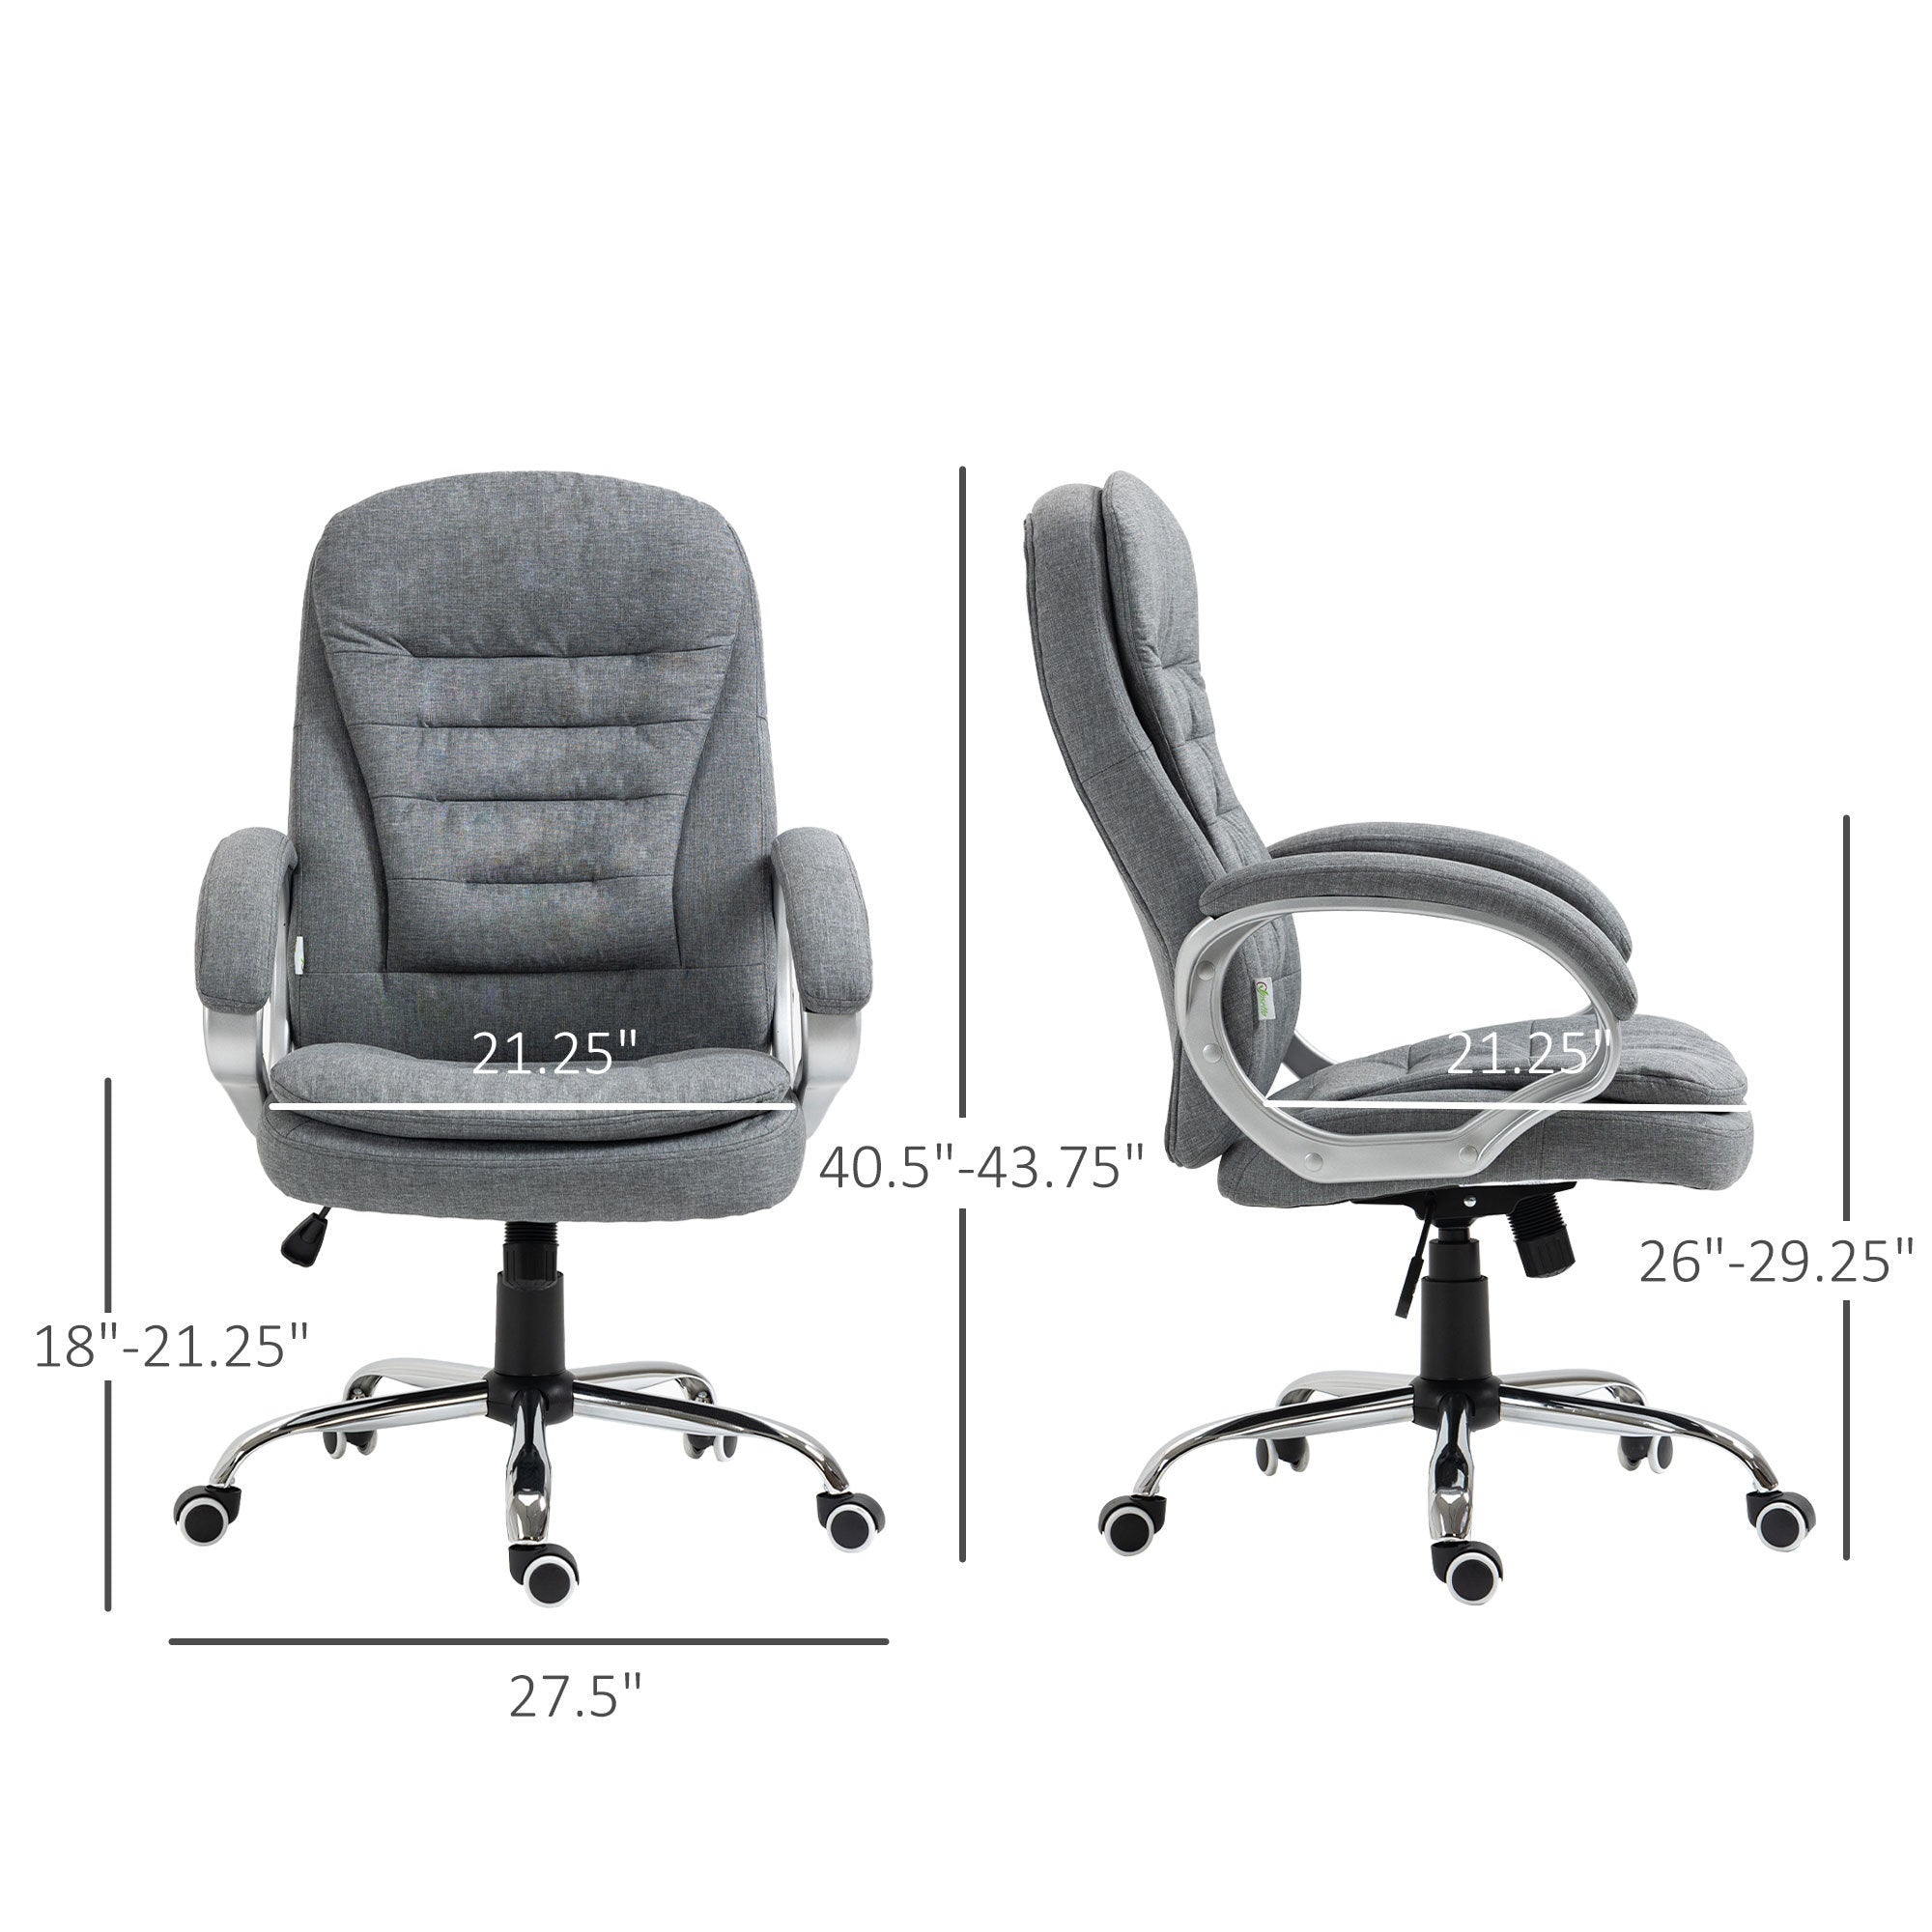 High Back Home Office Chair with Adjustable Height - Grey